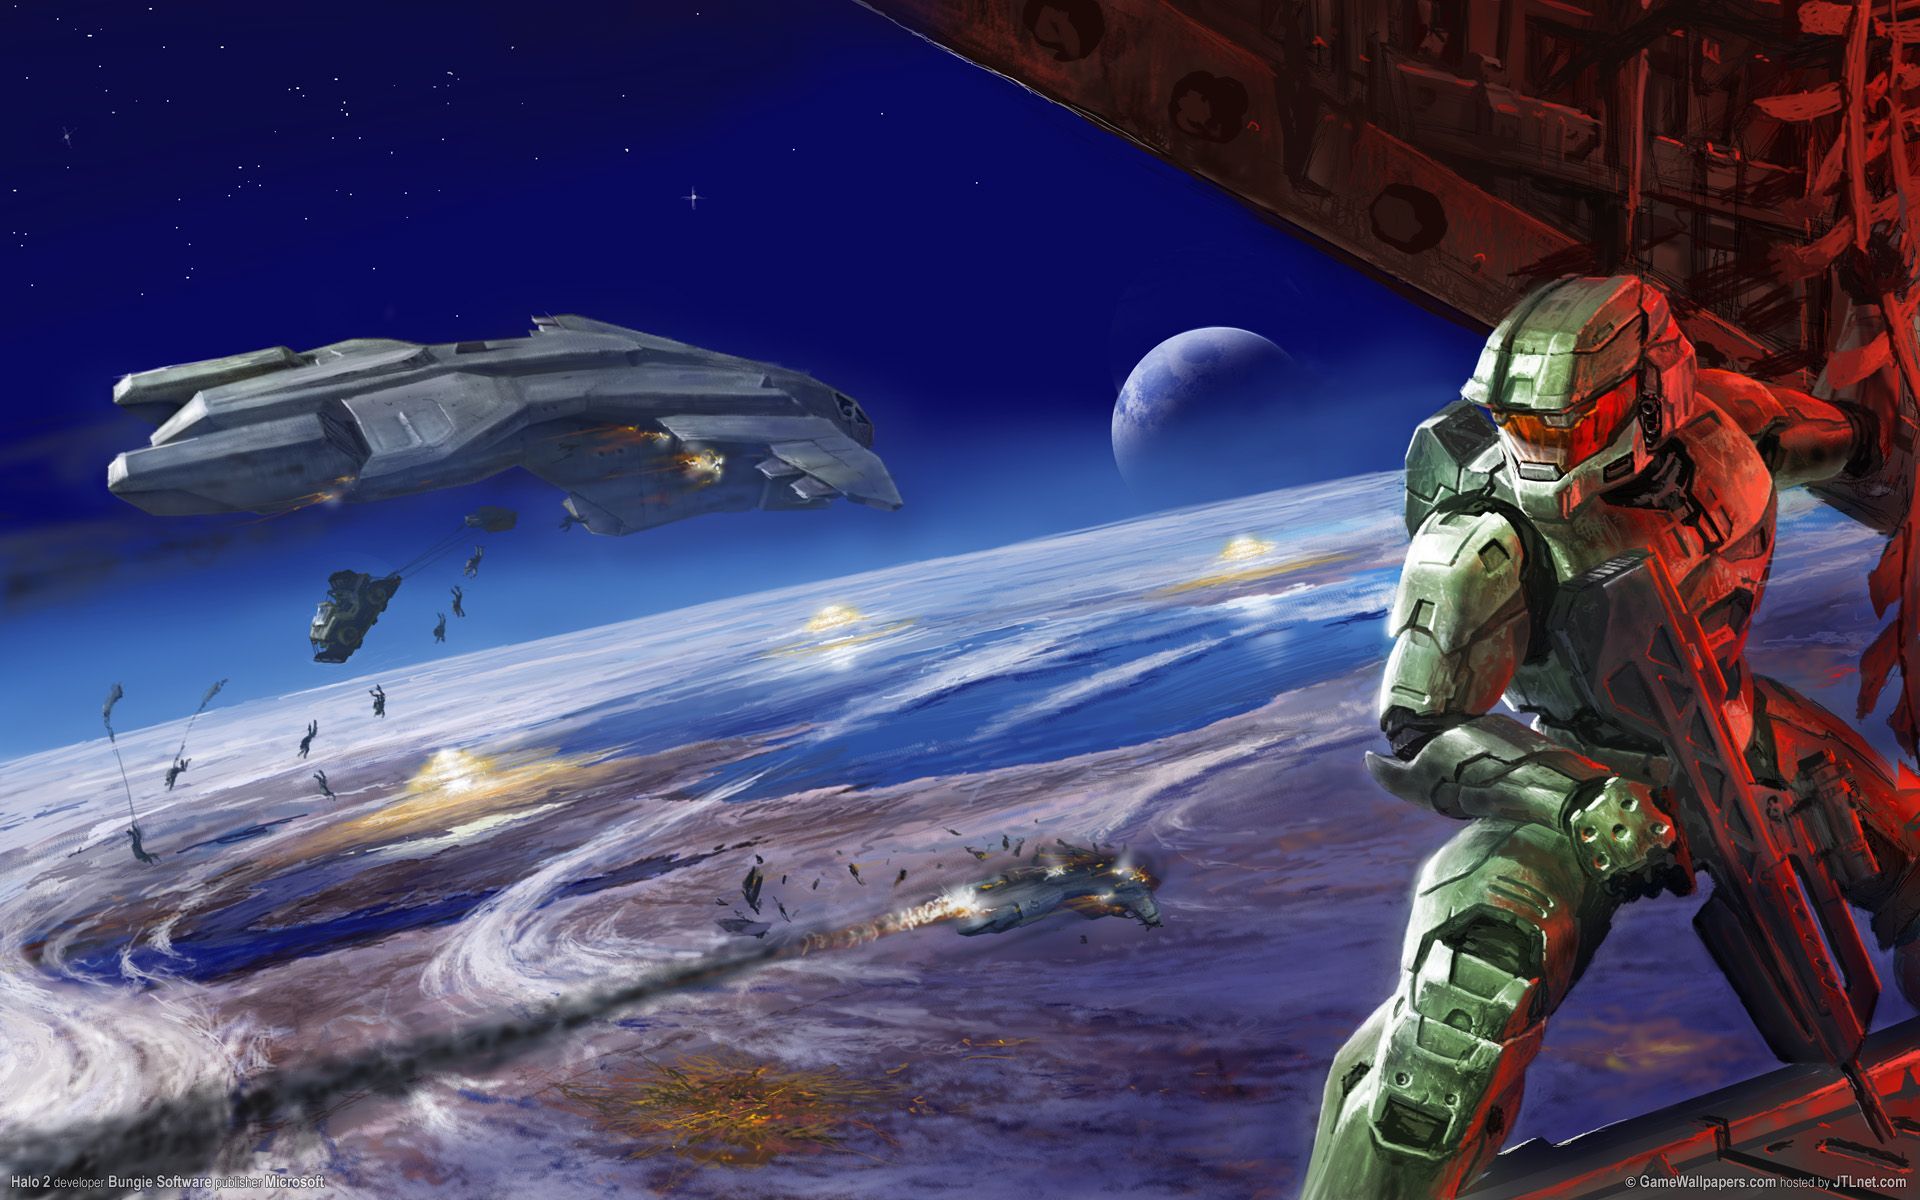 300+ Halo Wallpapers [PS: THEY'RE AWESOME!] [Archive ...